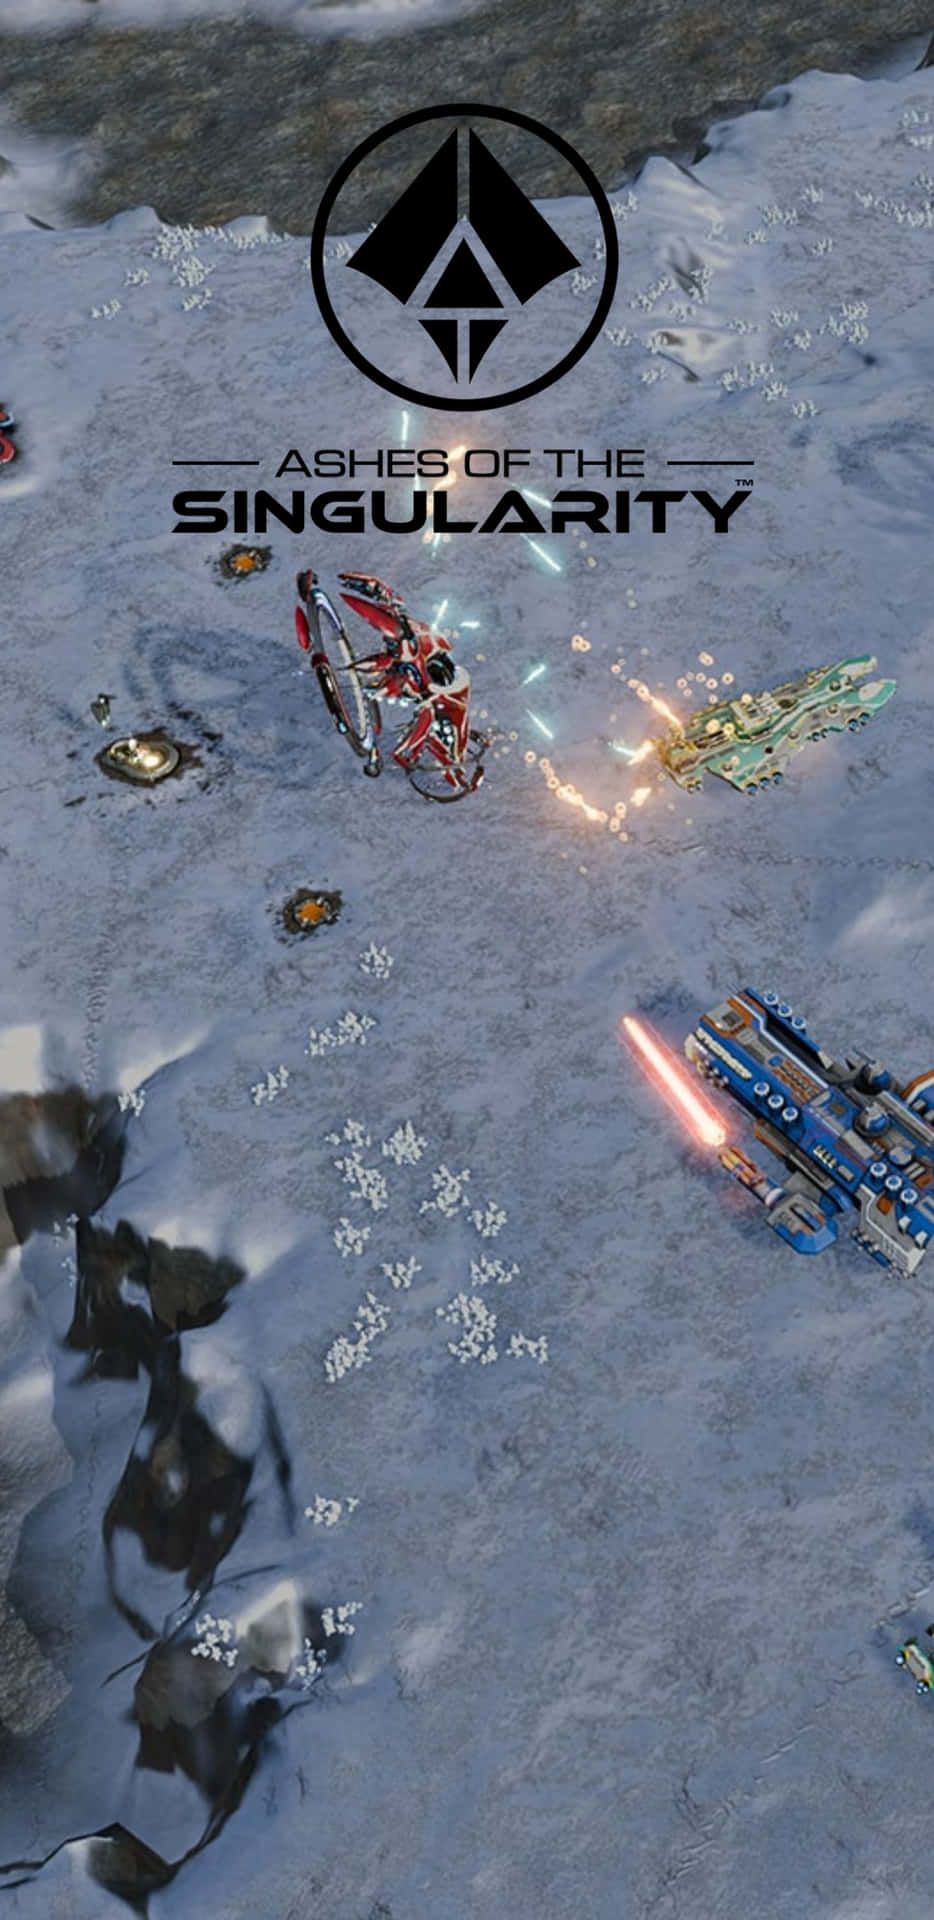 "Ashes Of The Singularity Burning Brightly On A Pixel 3xl"